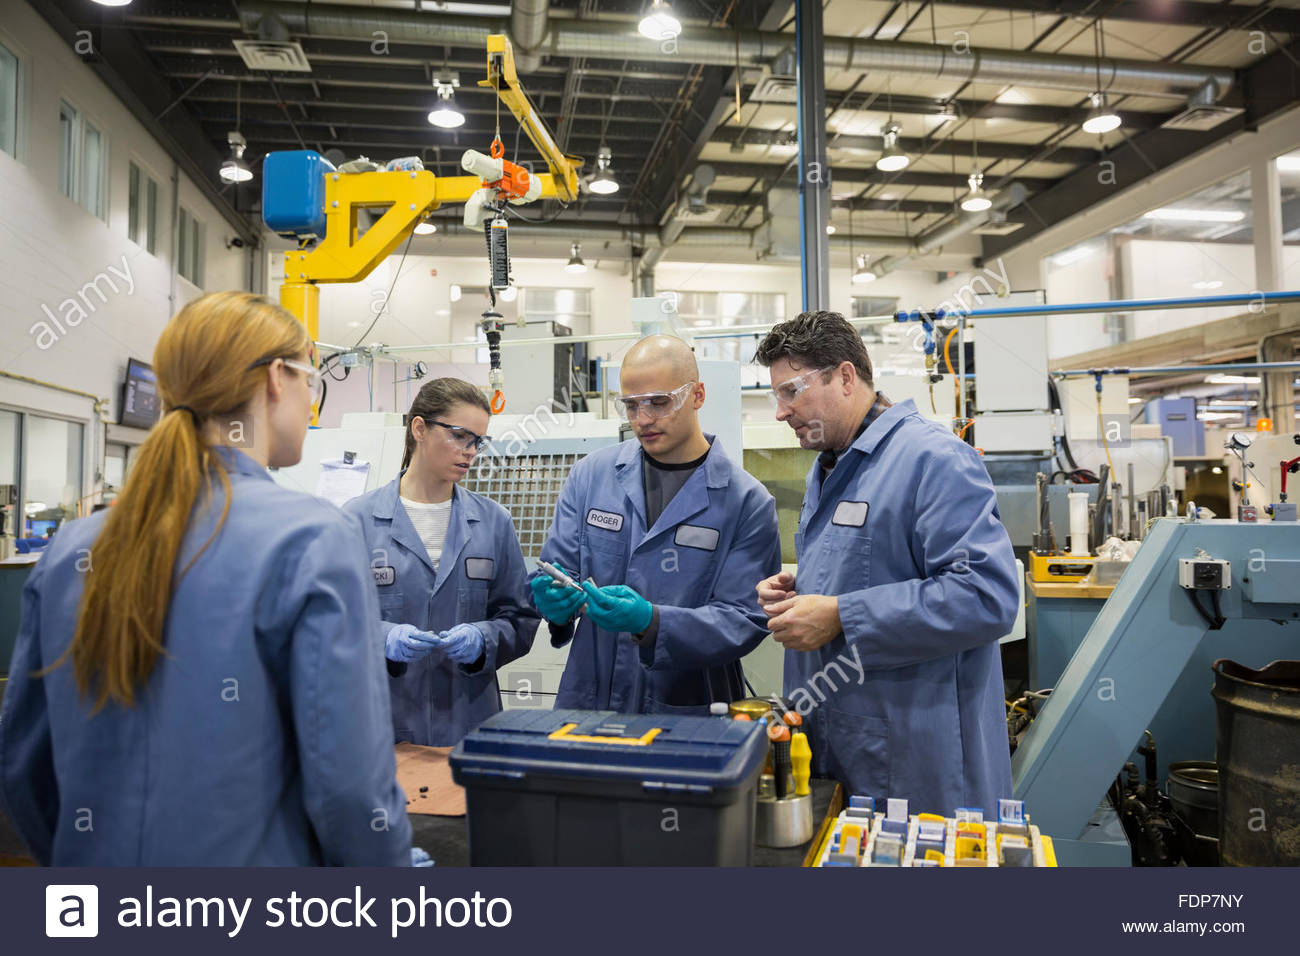 Workers examining parts in factory Stock Photo